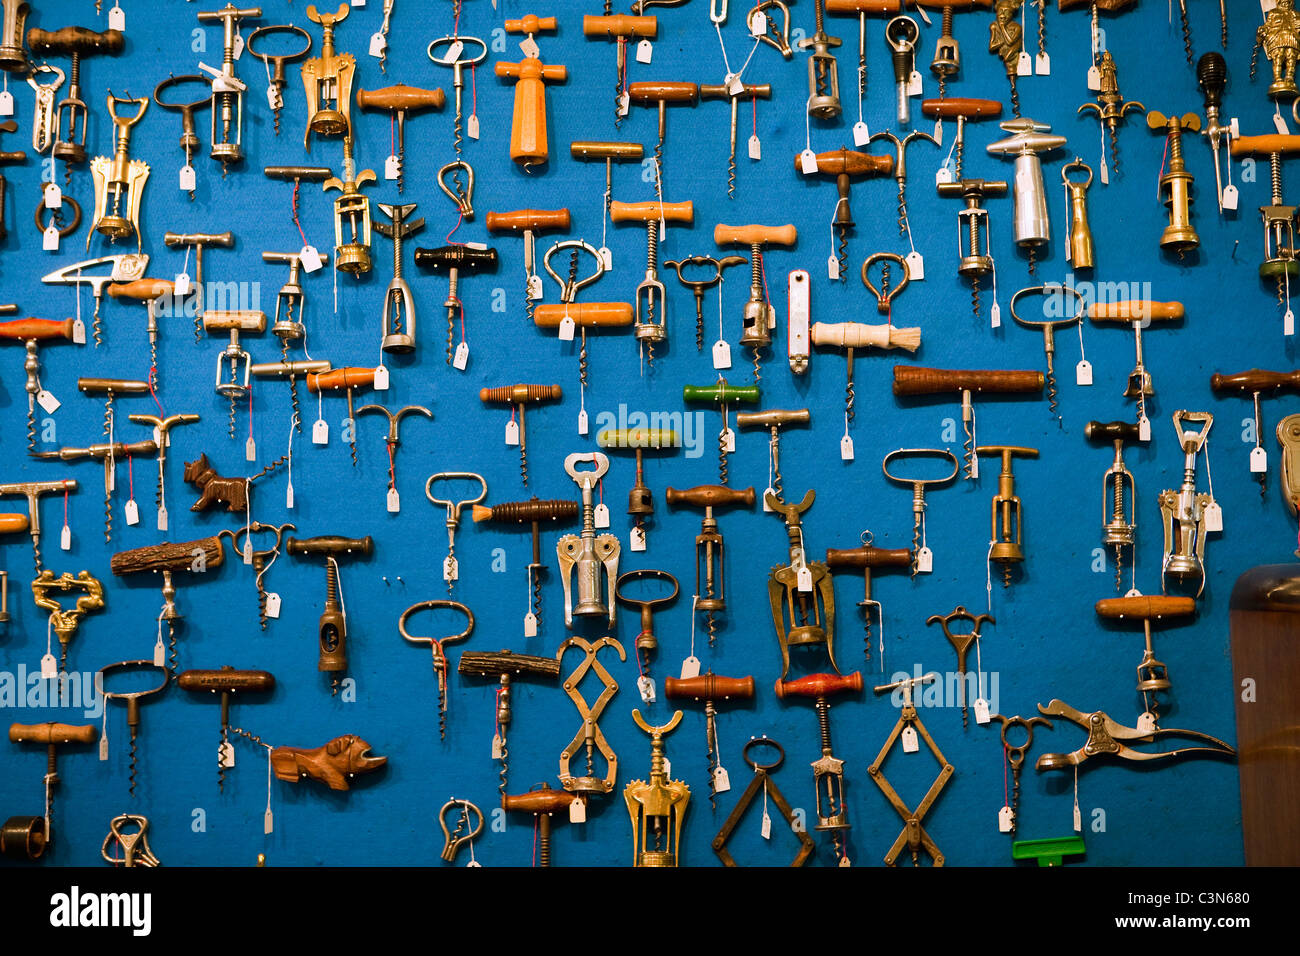 South Africa, Western Cape, Franschhoek, The Old Corkscrew, an antique and curiosity shop. Stock Photo